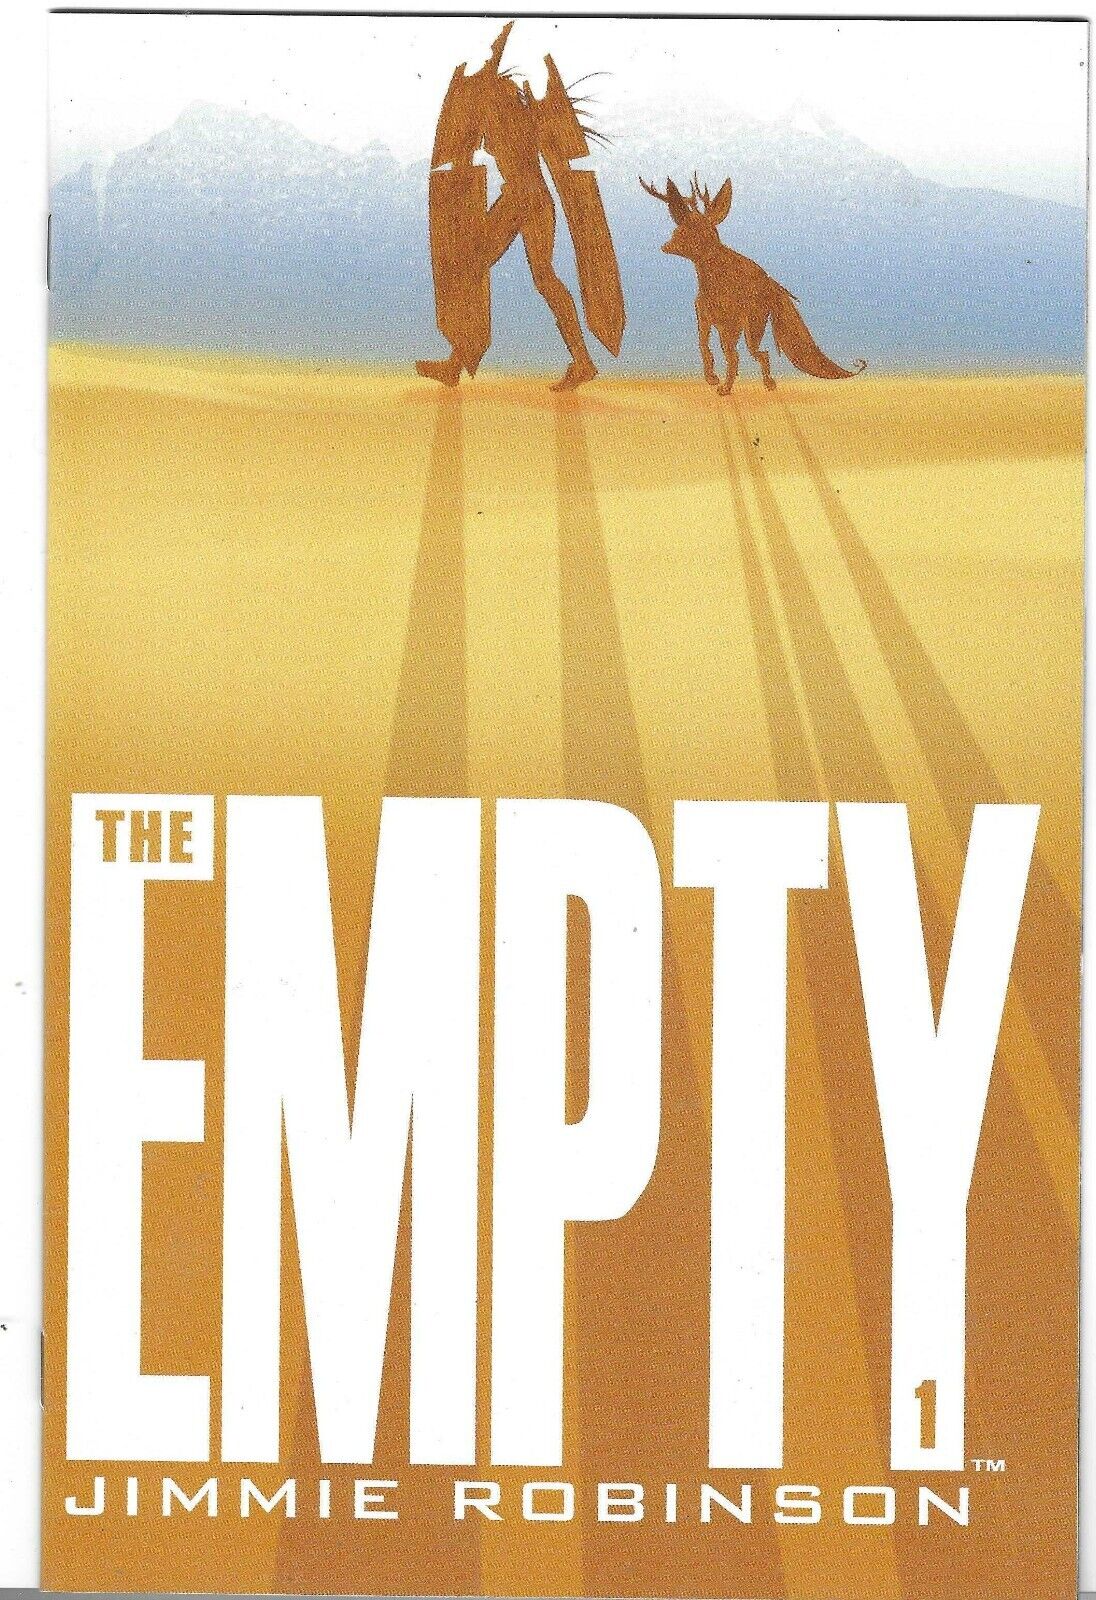 the Empty #1-6 complete series Jimmie Robinson post-apocalyptic Image Comics 